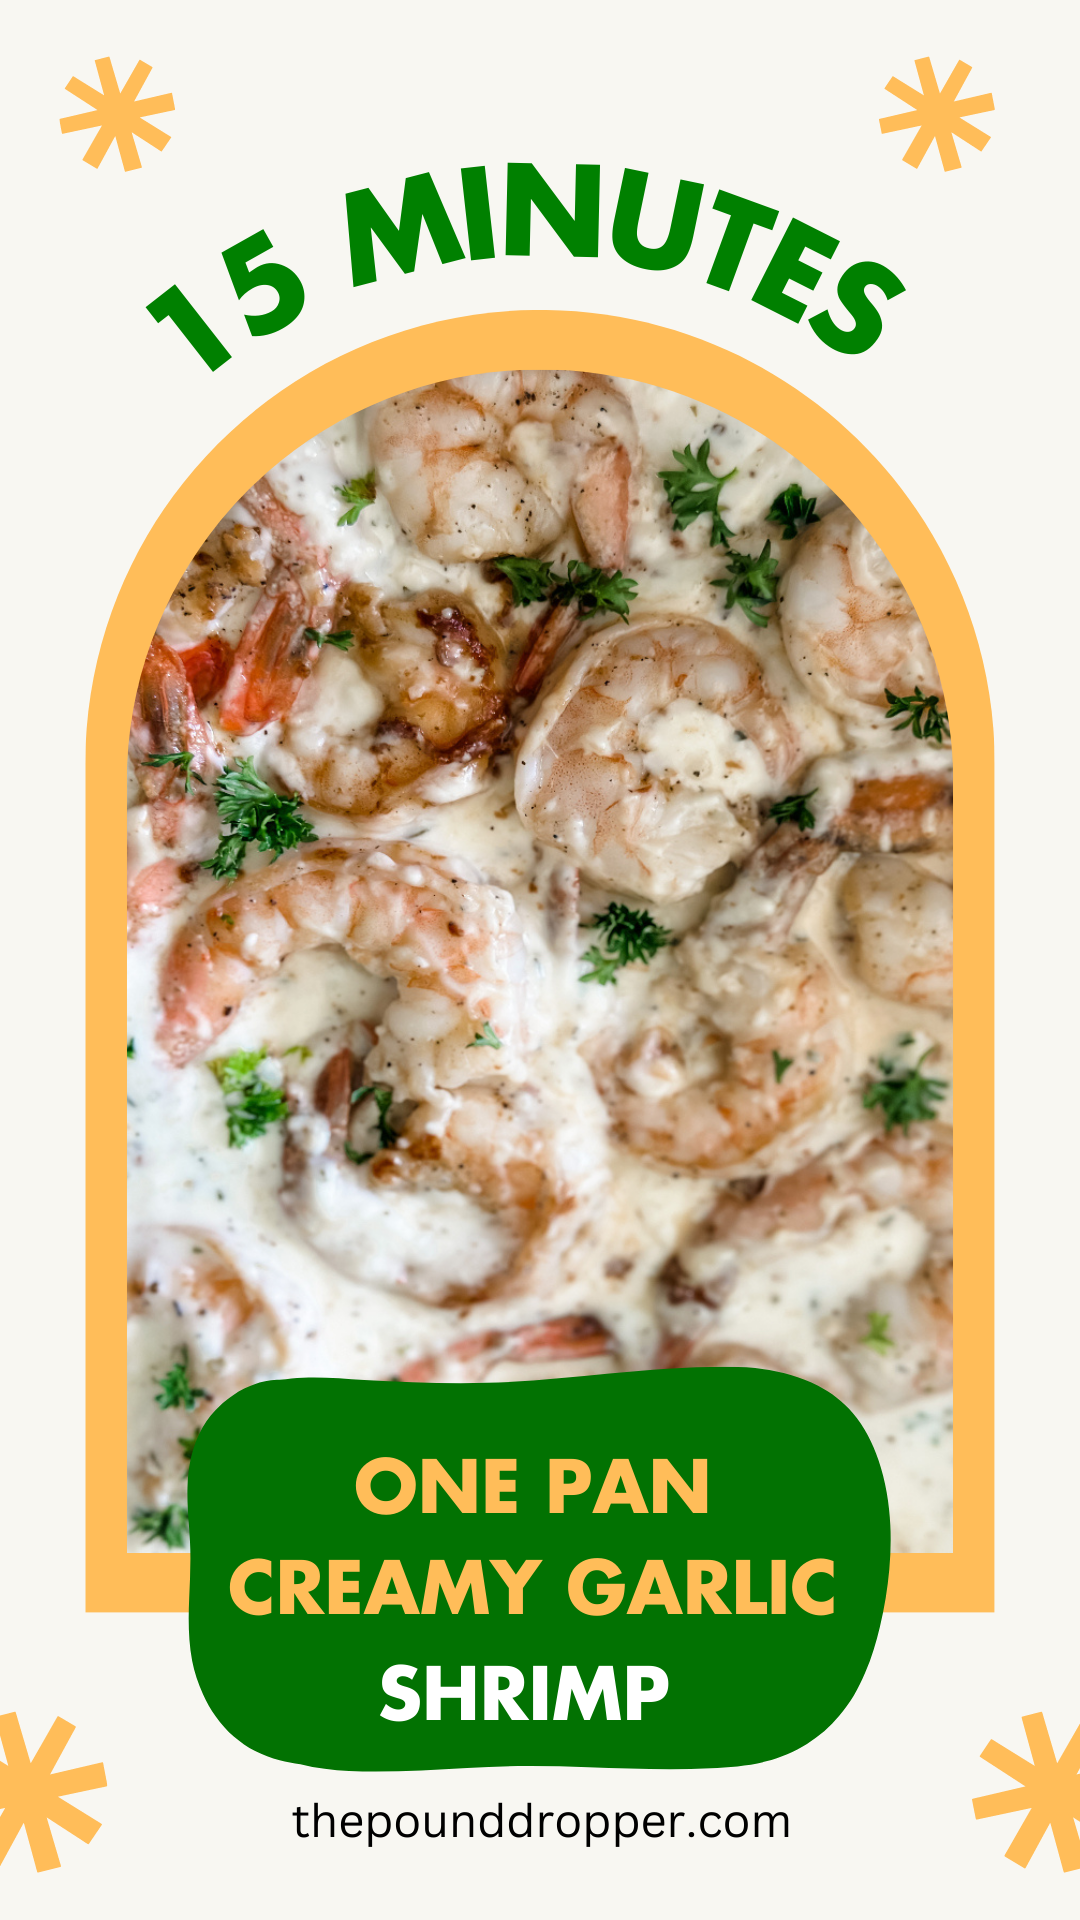  This One Pot Creamy Garlic Shrimp is made using one pot-for easy clean! This dish is low in carbs, gluten-free, and tastes amazing! These jumbo shrimp are seared and smothered in a homemade lightened up delicious, creamy garlic sauce! Simply irresistible! via @pounddropper